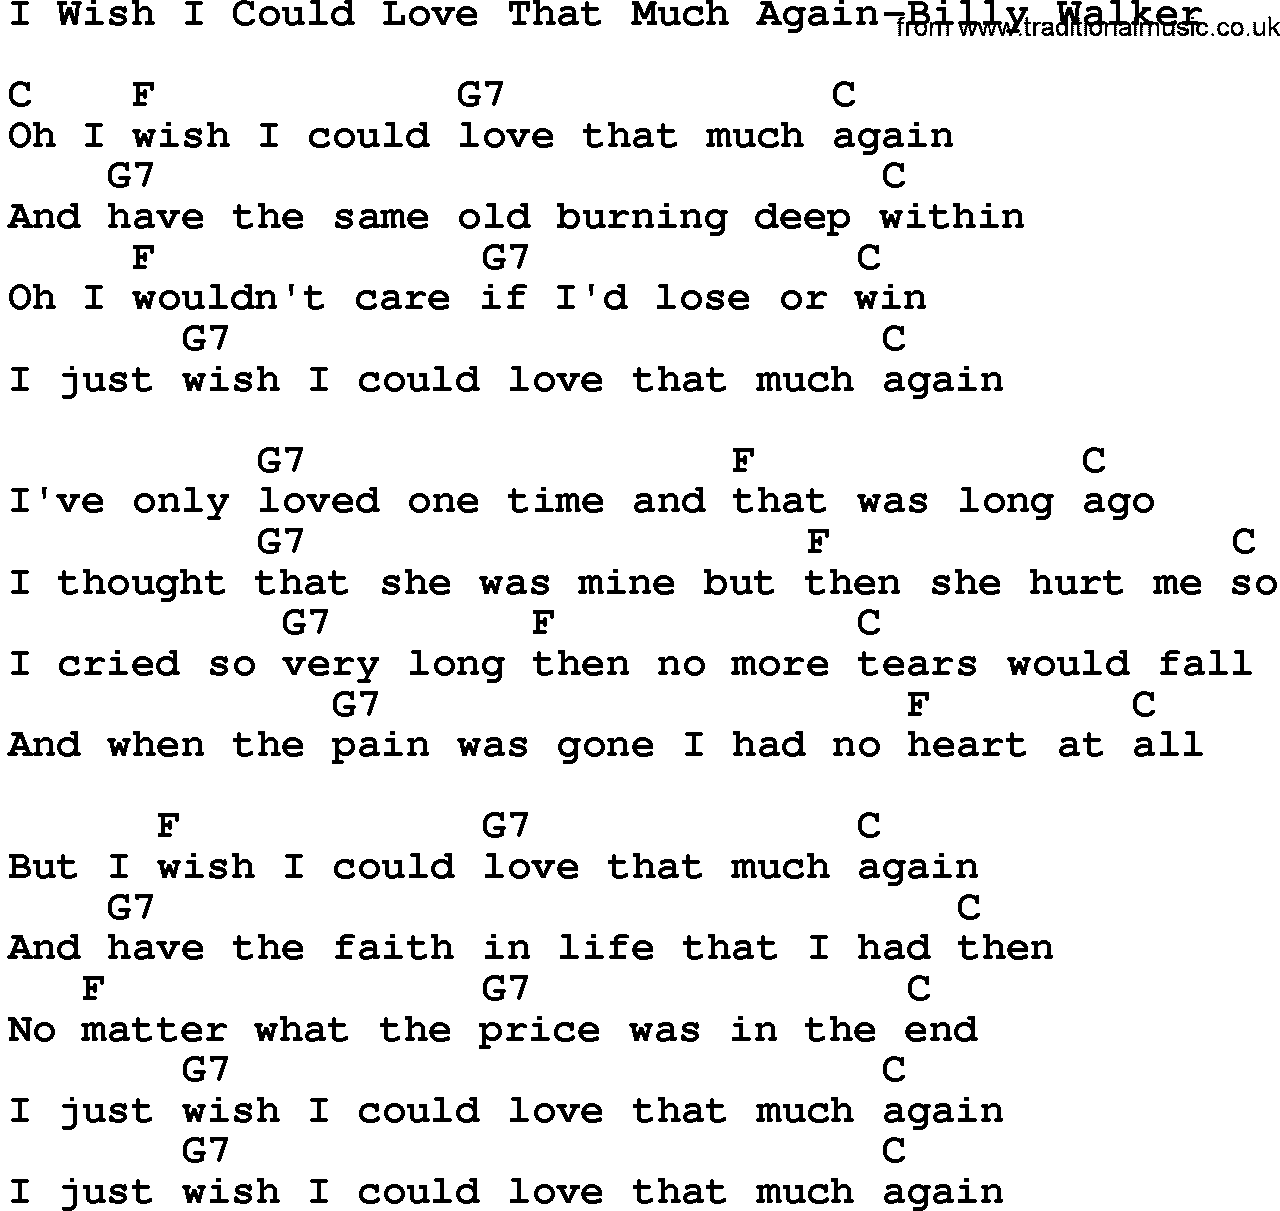 Country music song: I Wish I Could Love That Much Again-Billy Walker lyrics and chords